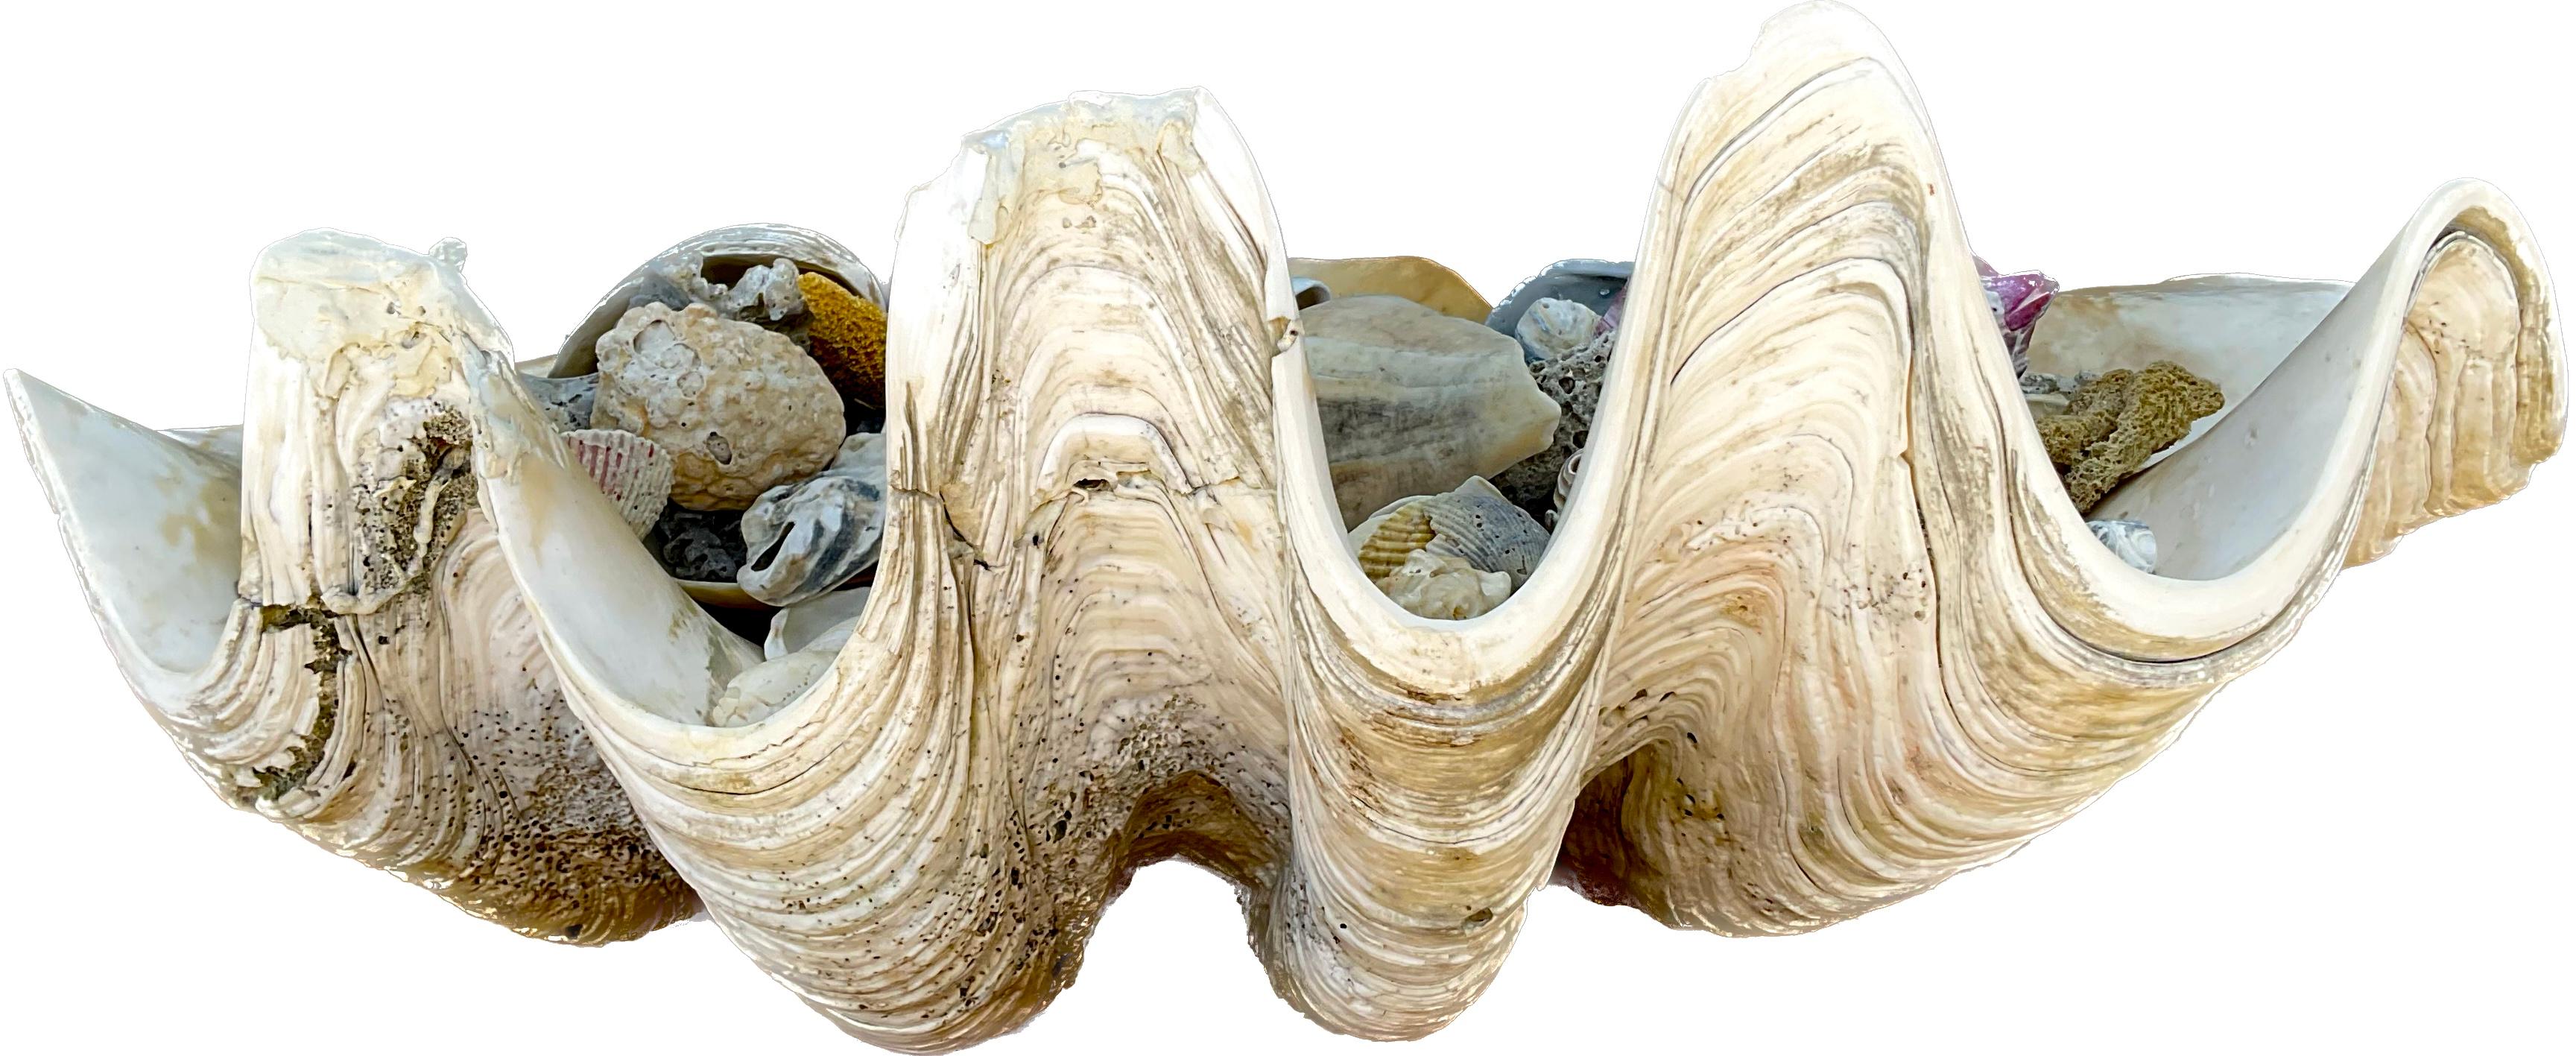 Authentic large clam shell specimen with its iconic sculptural form and sea inspired colors and textures. Filled with a myriad of multicolored seashells.  Measure: 23